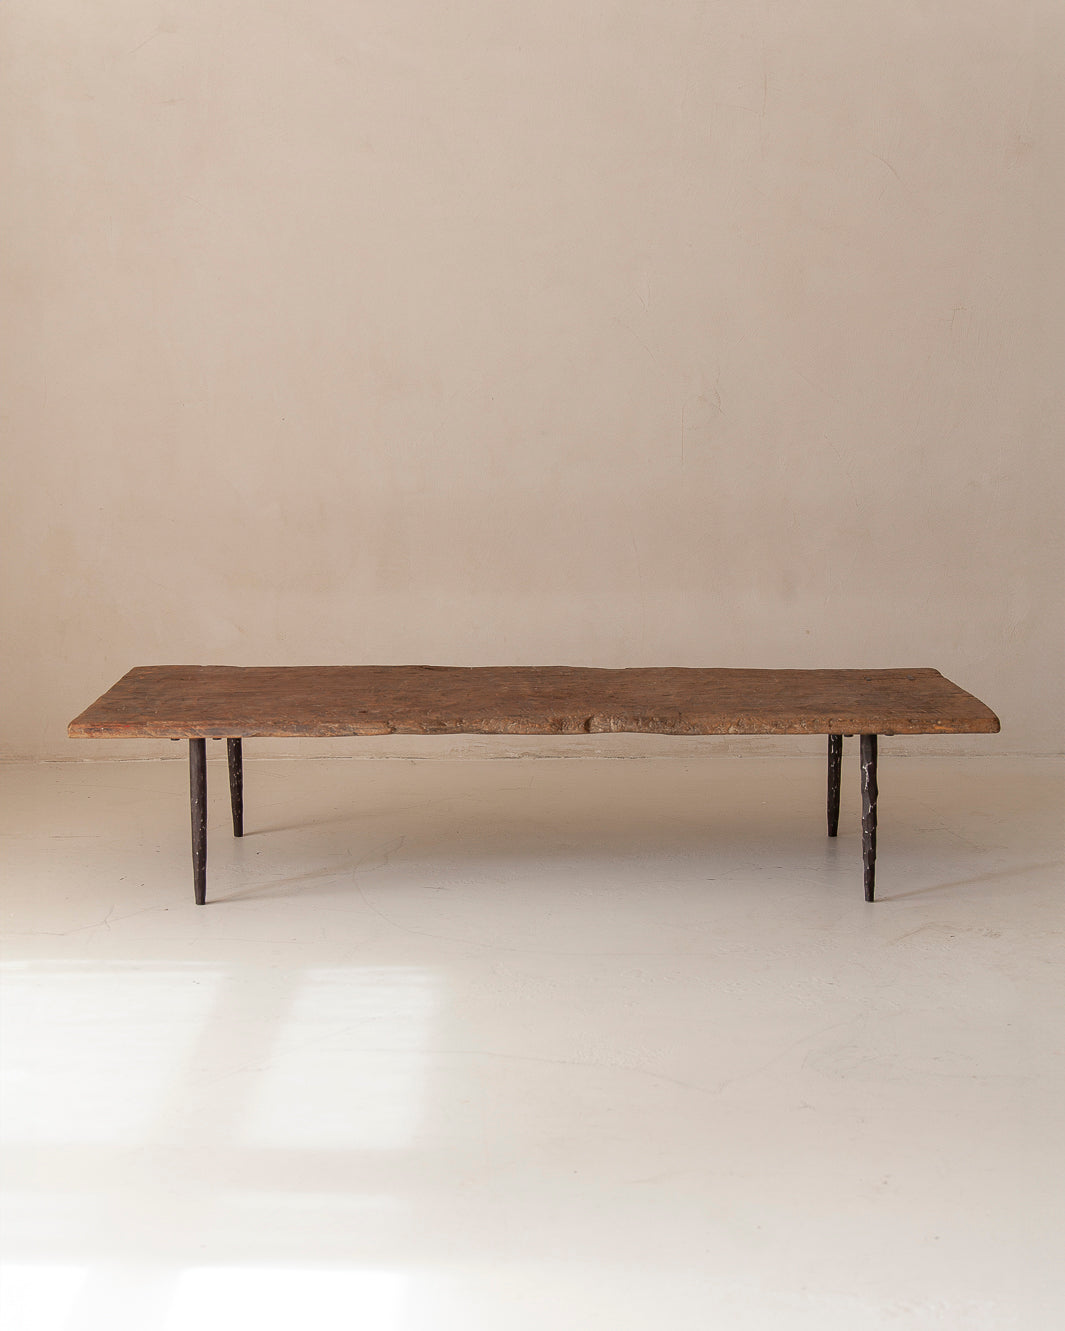 Chinese table from the 1930s, 163x60x45cm